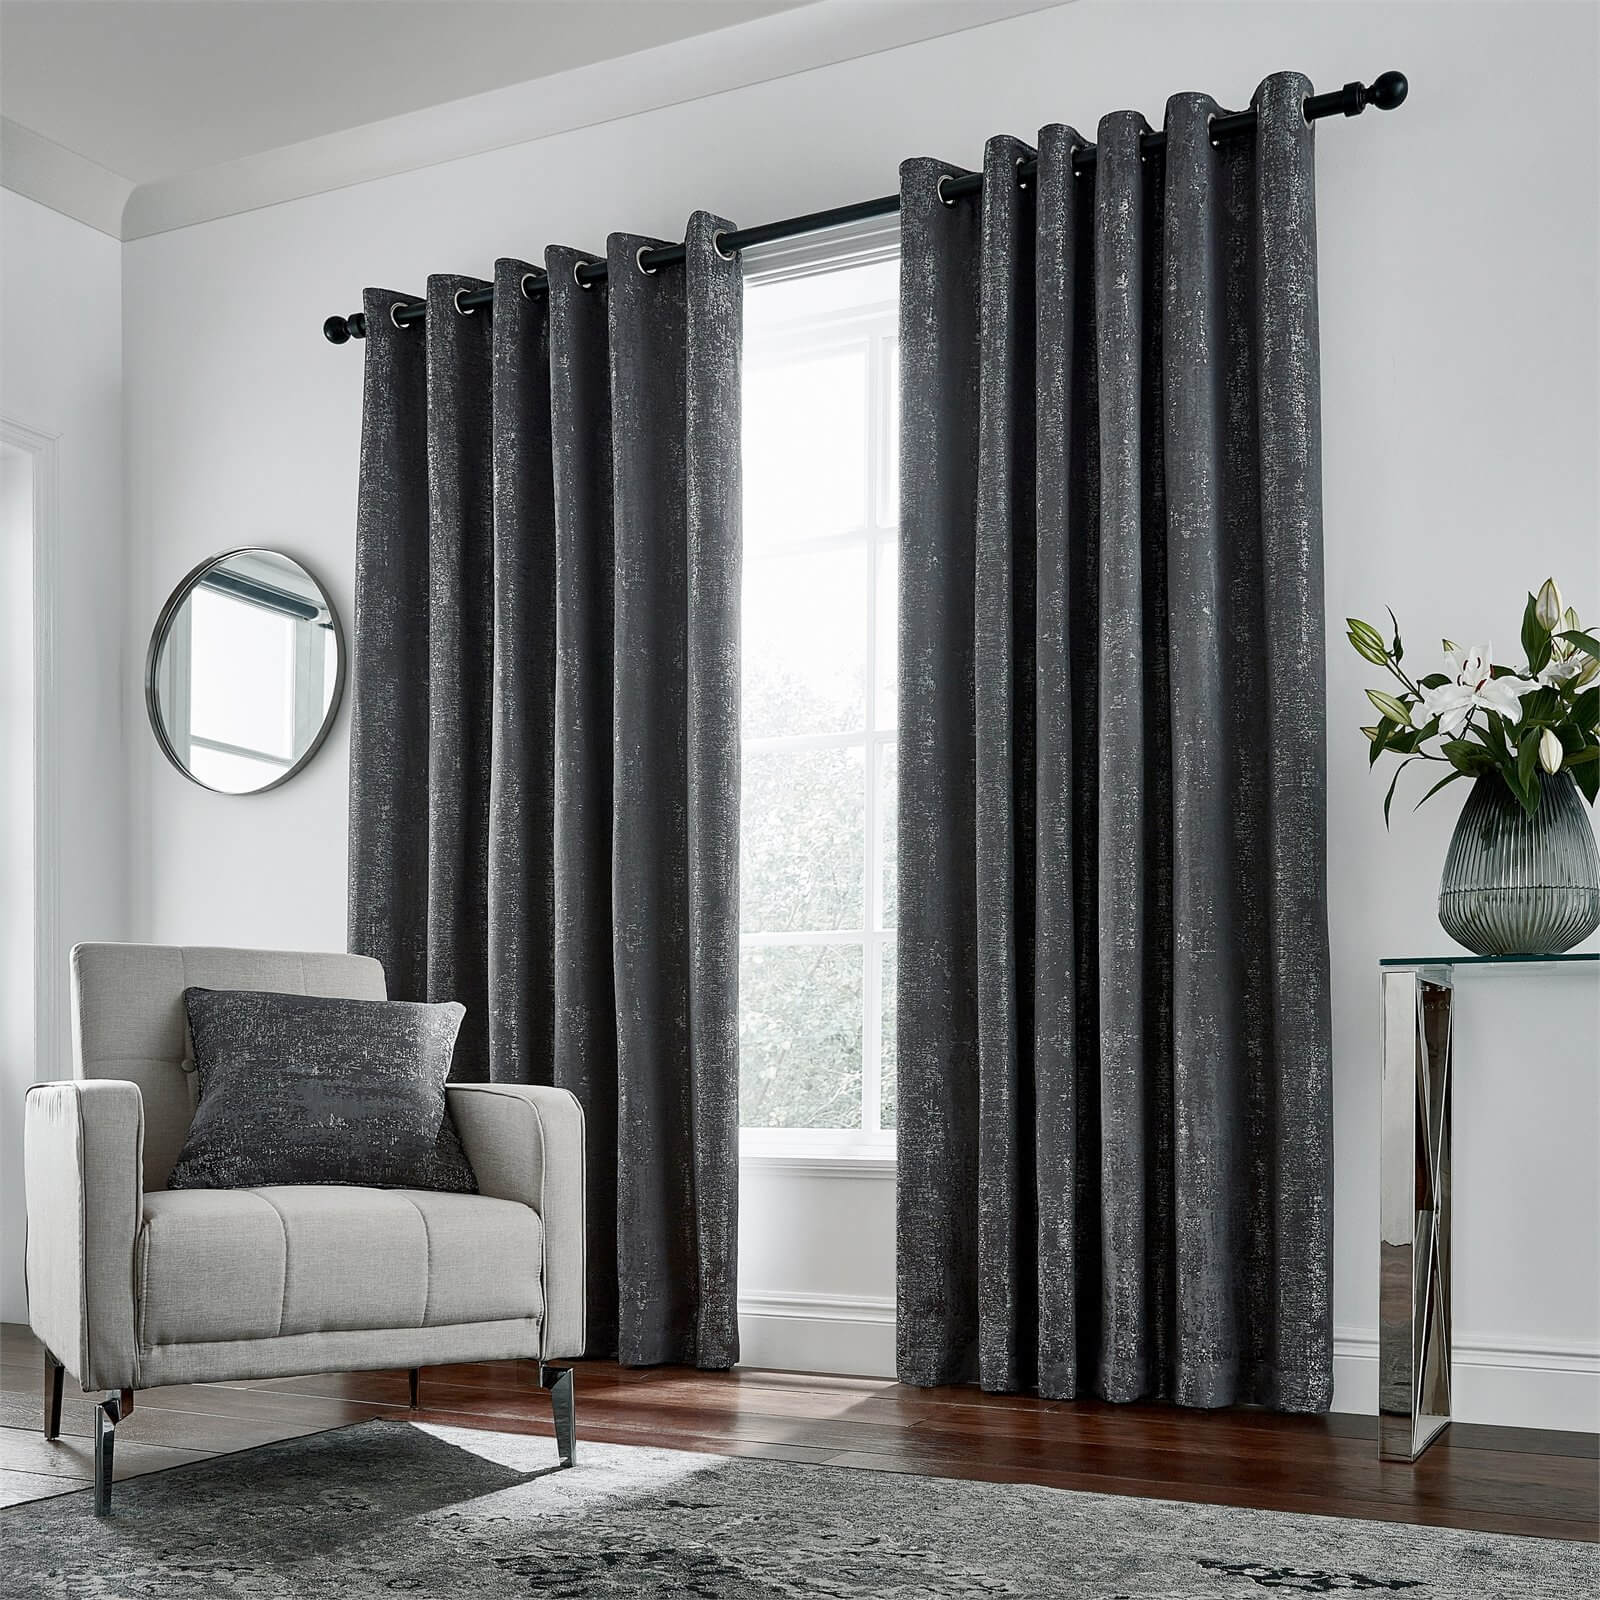 Peacock Blue Hotel Collection Roma Lined Curtains 90 x 90 - Gunmetal